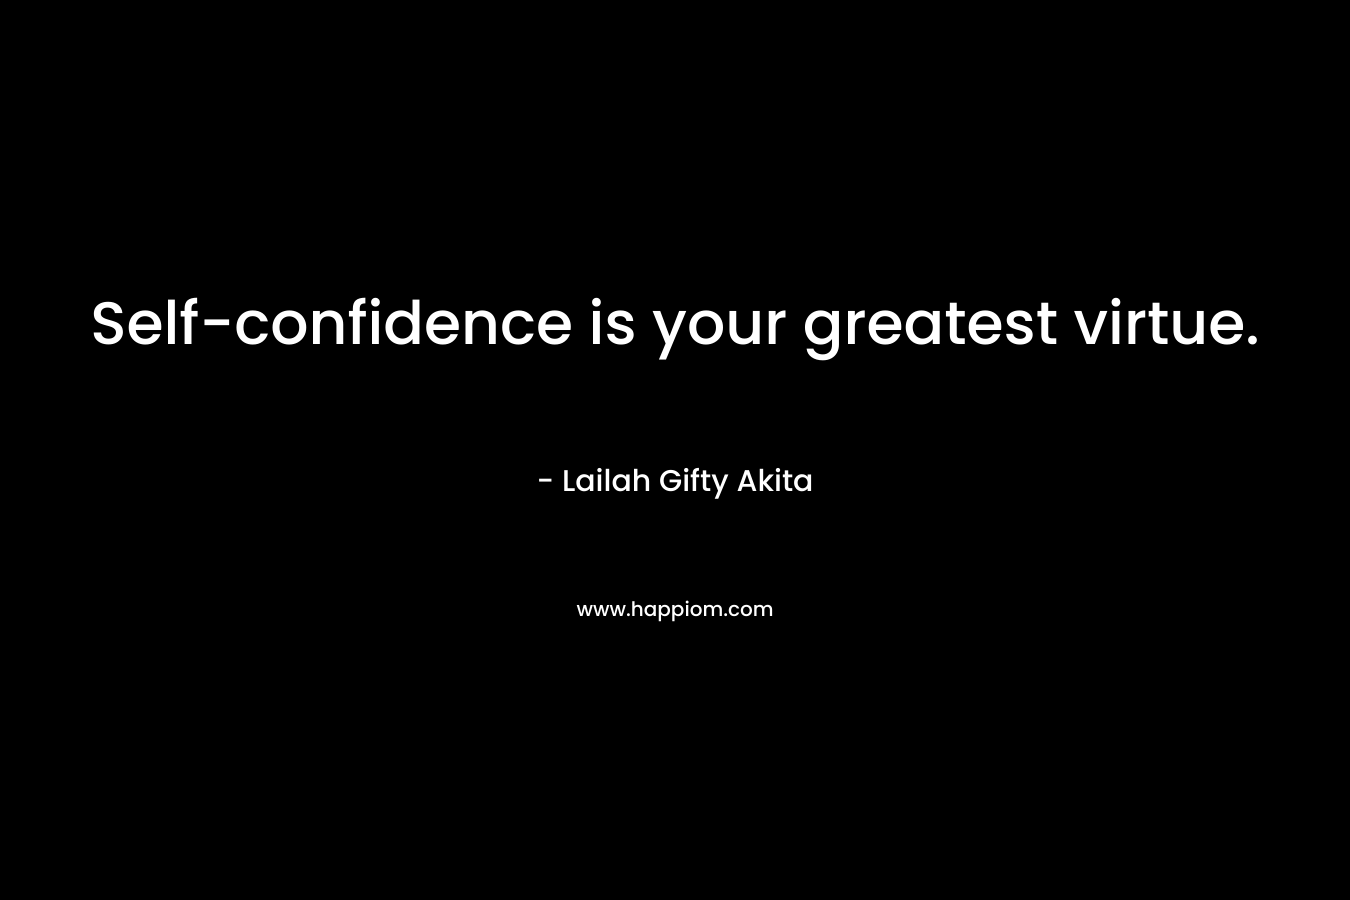 Self-confidence is your greatest virtue. – Lailah Gifty Akita